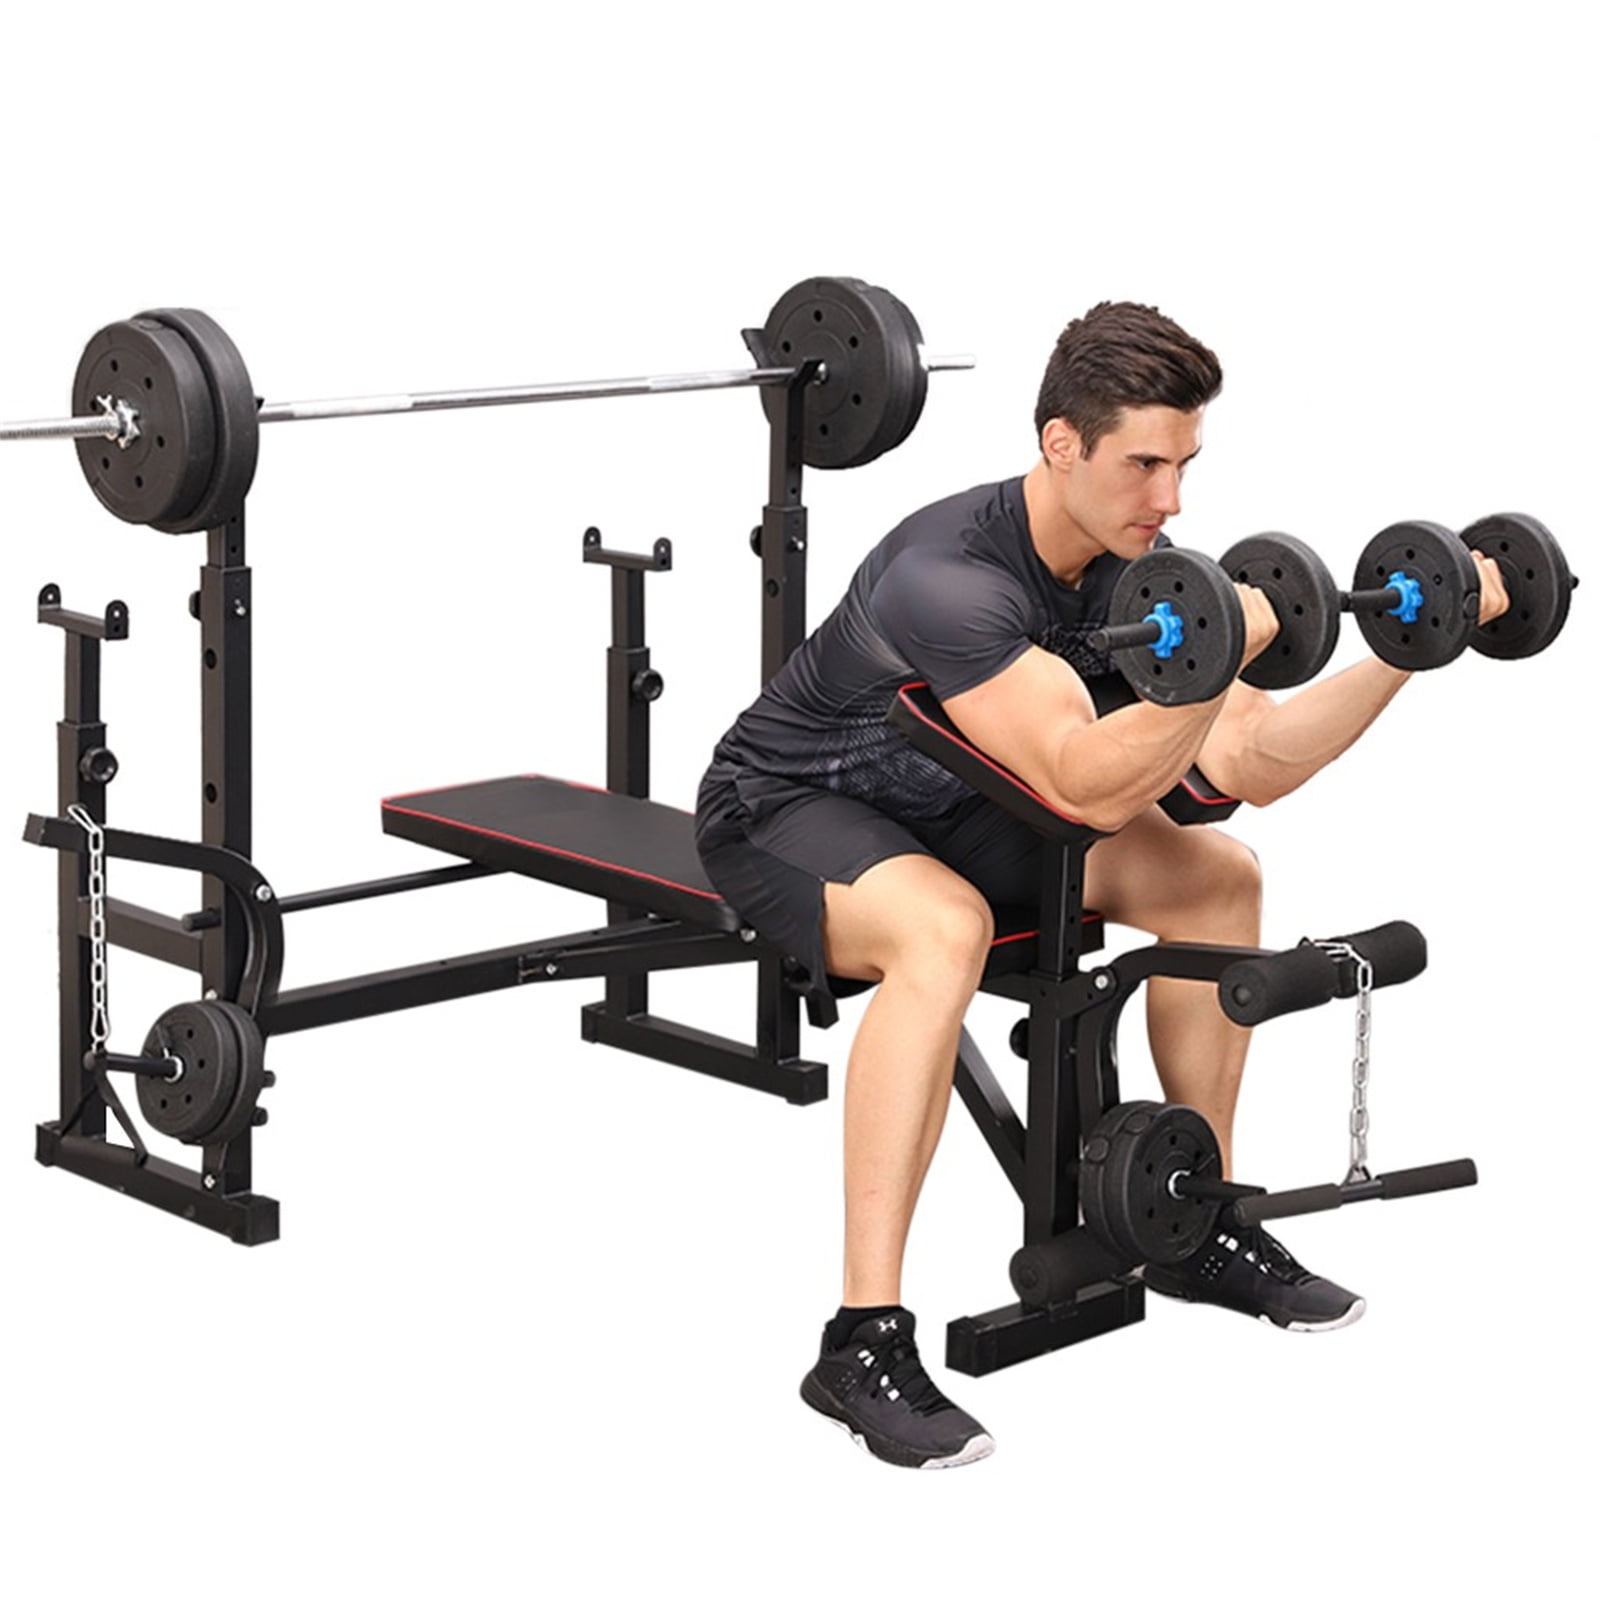 Folding Adjustable Fitness Dumbbell Weight Bench Barbell Lifting Squat Rack 